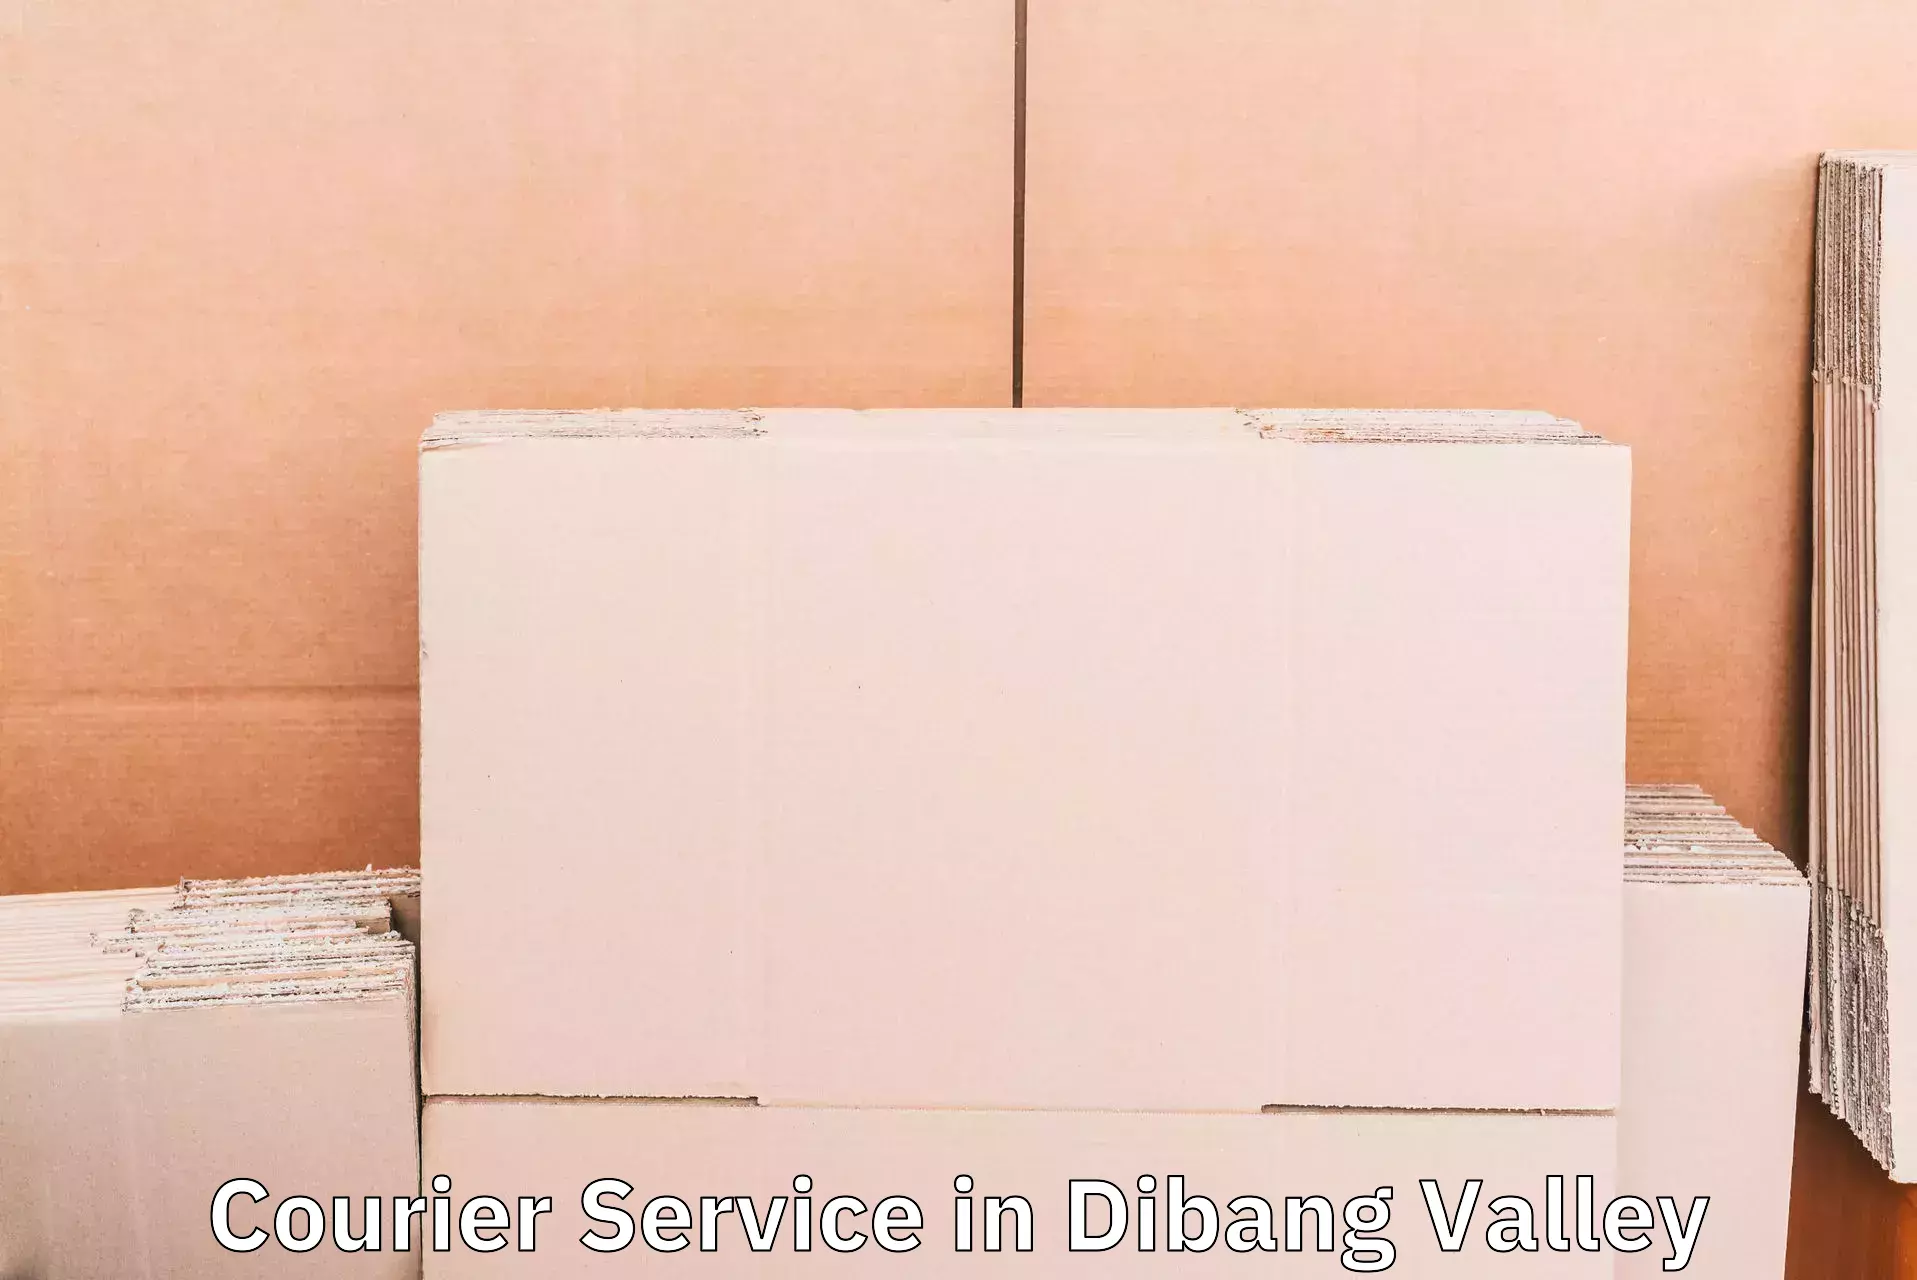 Individual parcel service in Dibang Valley